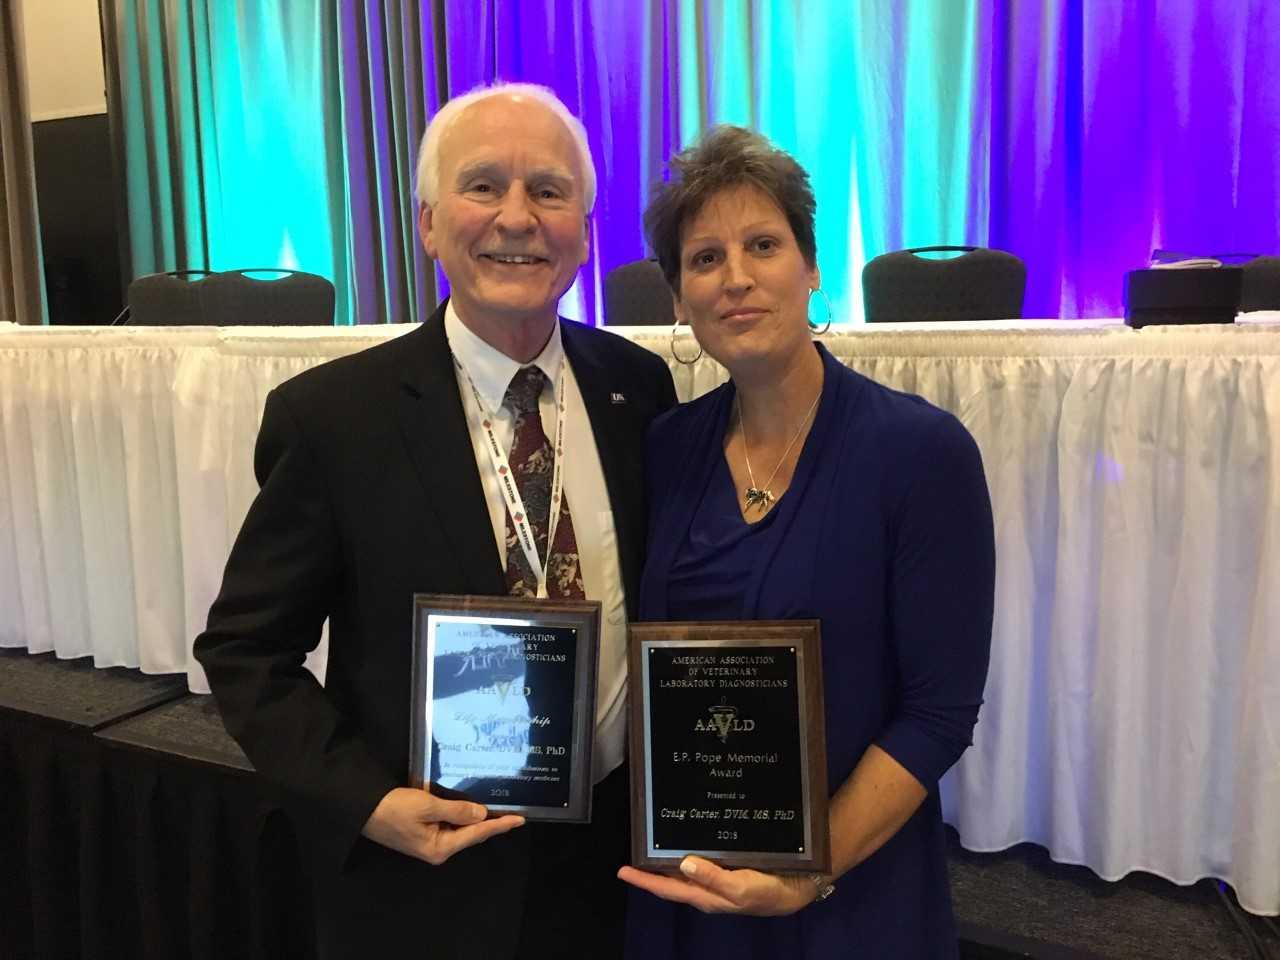 Craig Carter, with his wife Rhonda, after receiving the AAVDL awards. Photo provided by Carter.